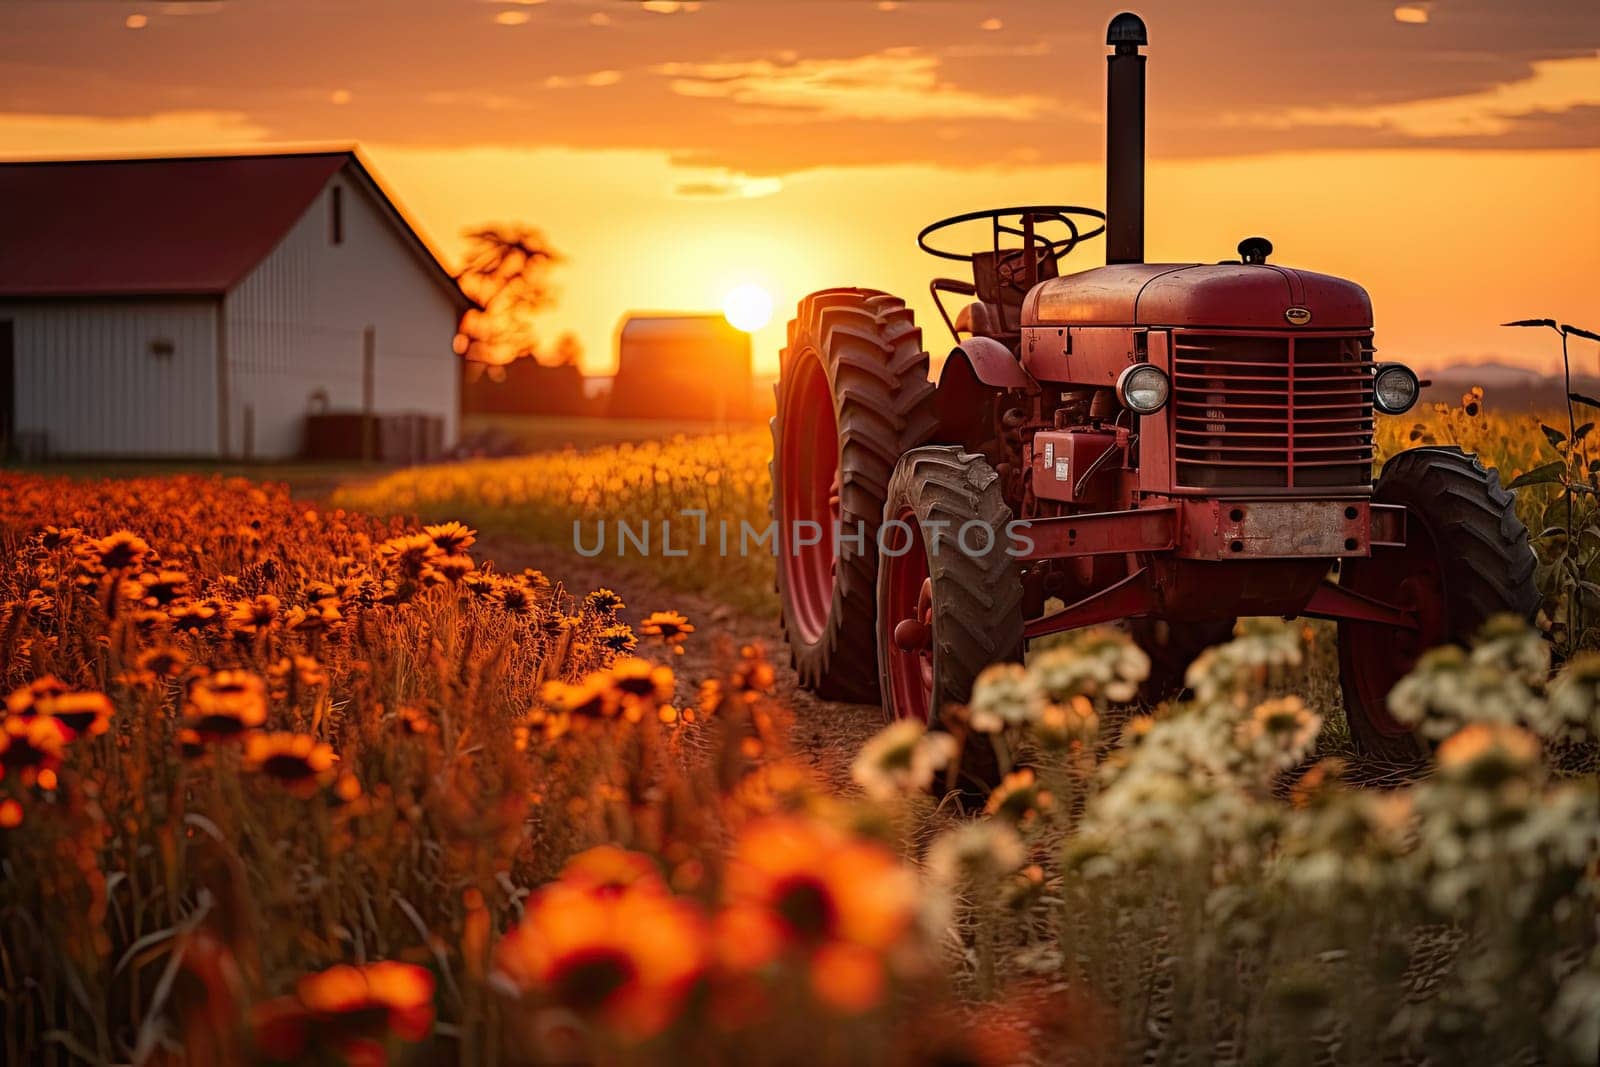 A Serene Evening on the Farm: A Tractor Silhouetted Against a Vibrant Sunset